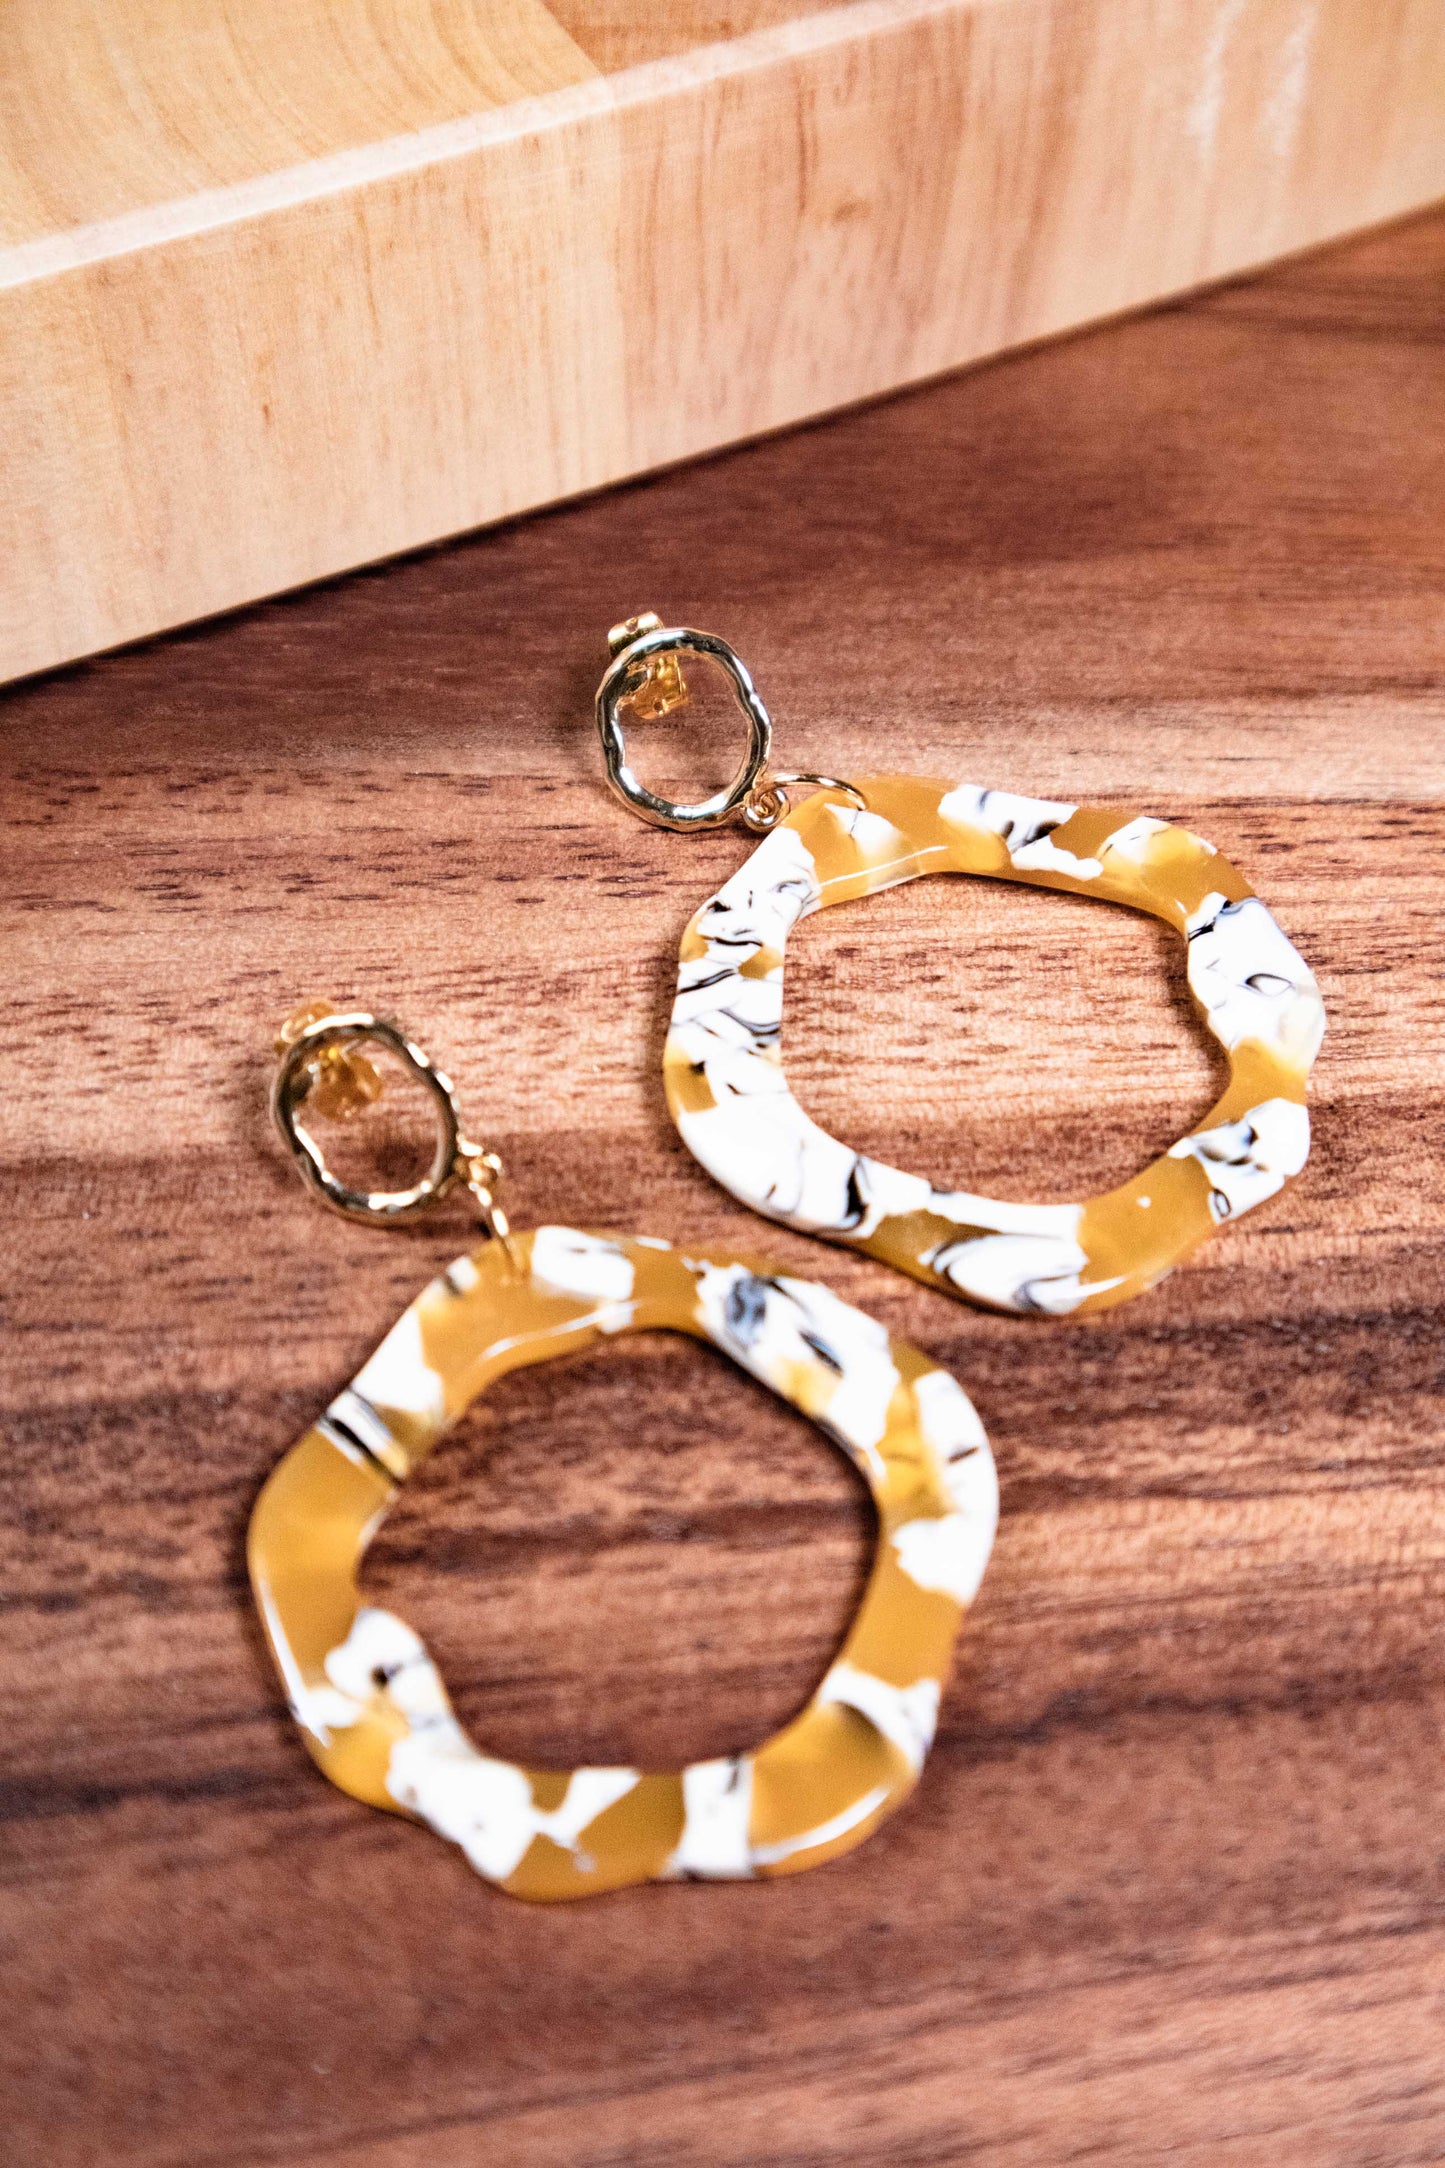 Earrings by FeSendra | Gold and yellow marbled